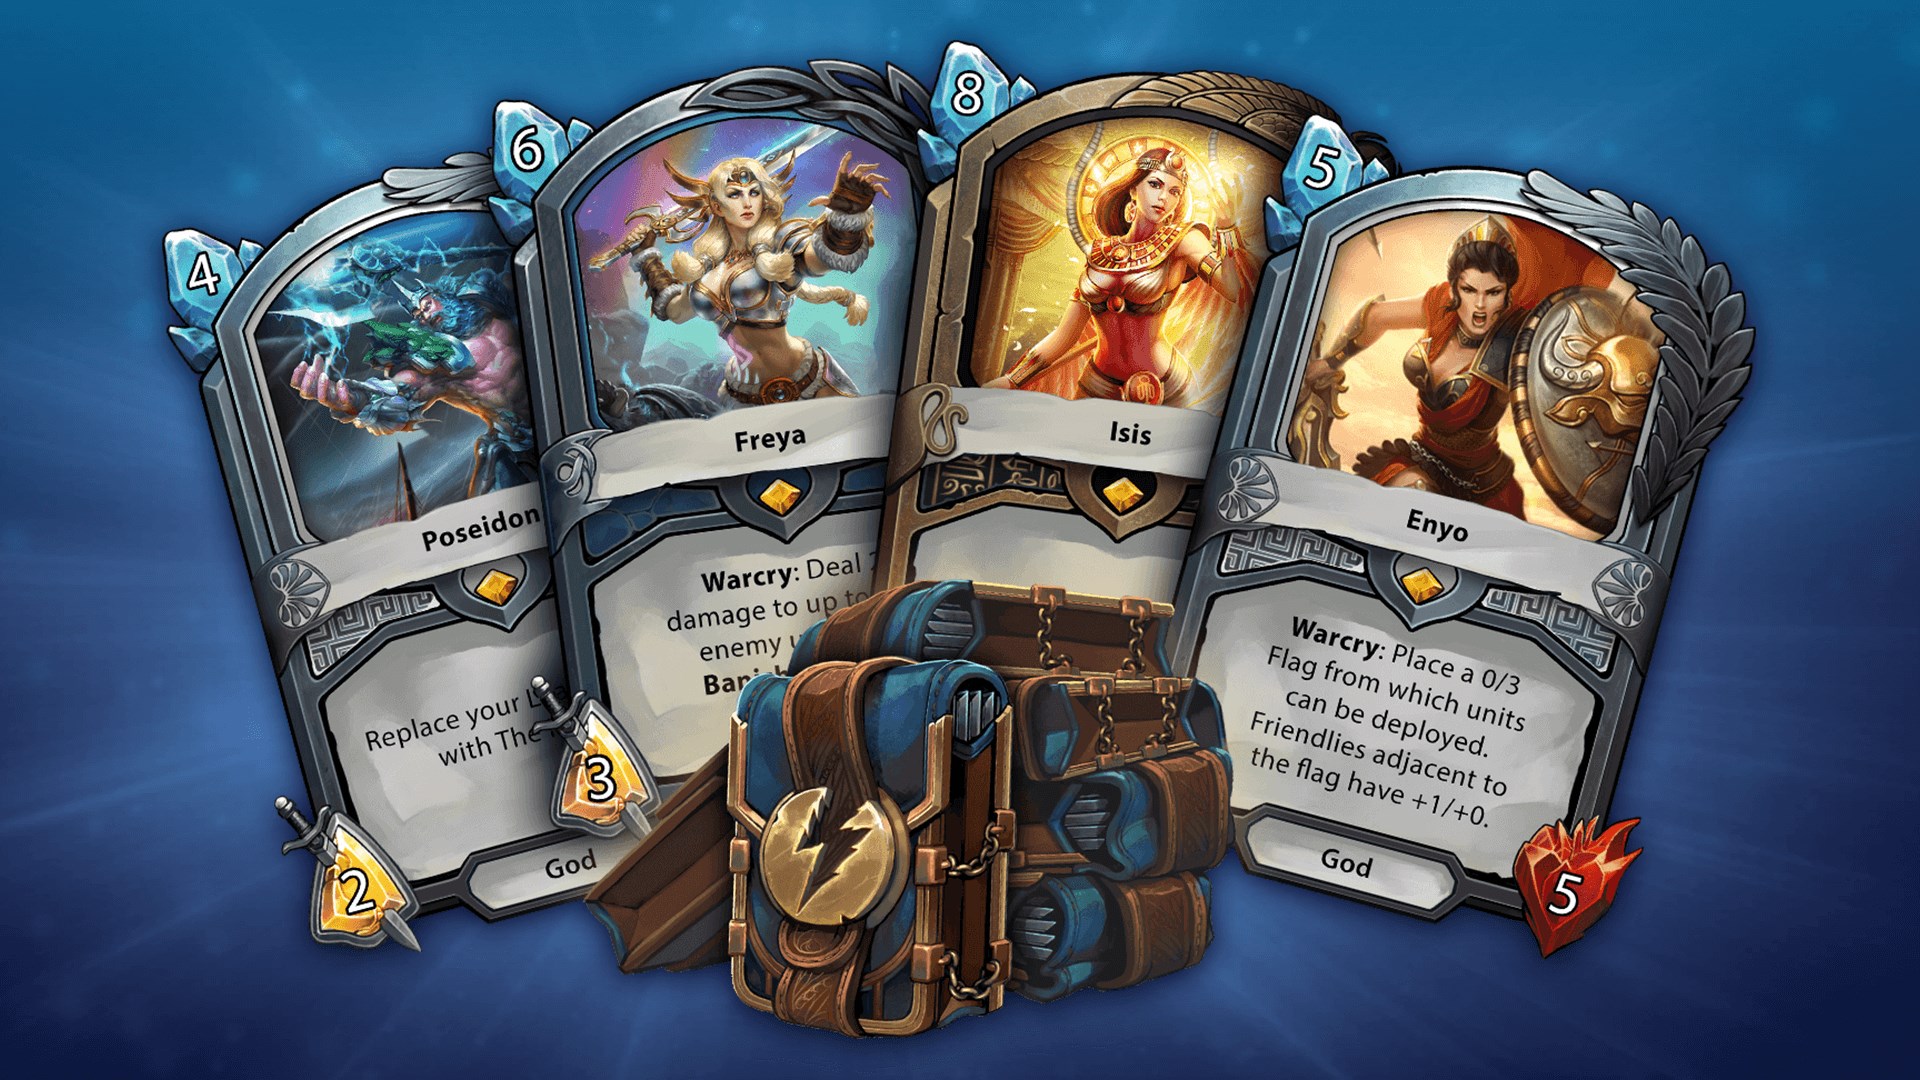 Hand of the Gods Founder's Pack